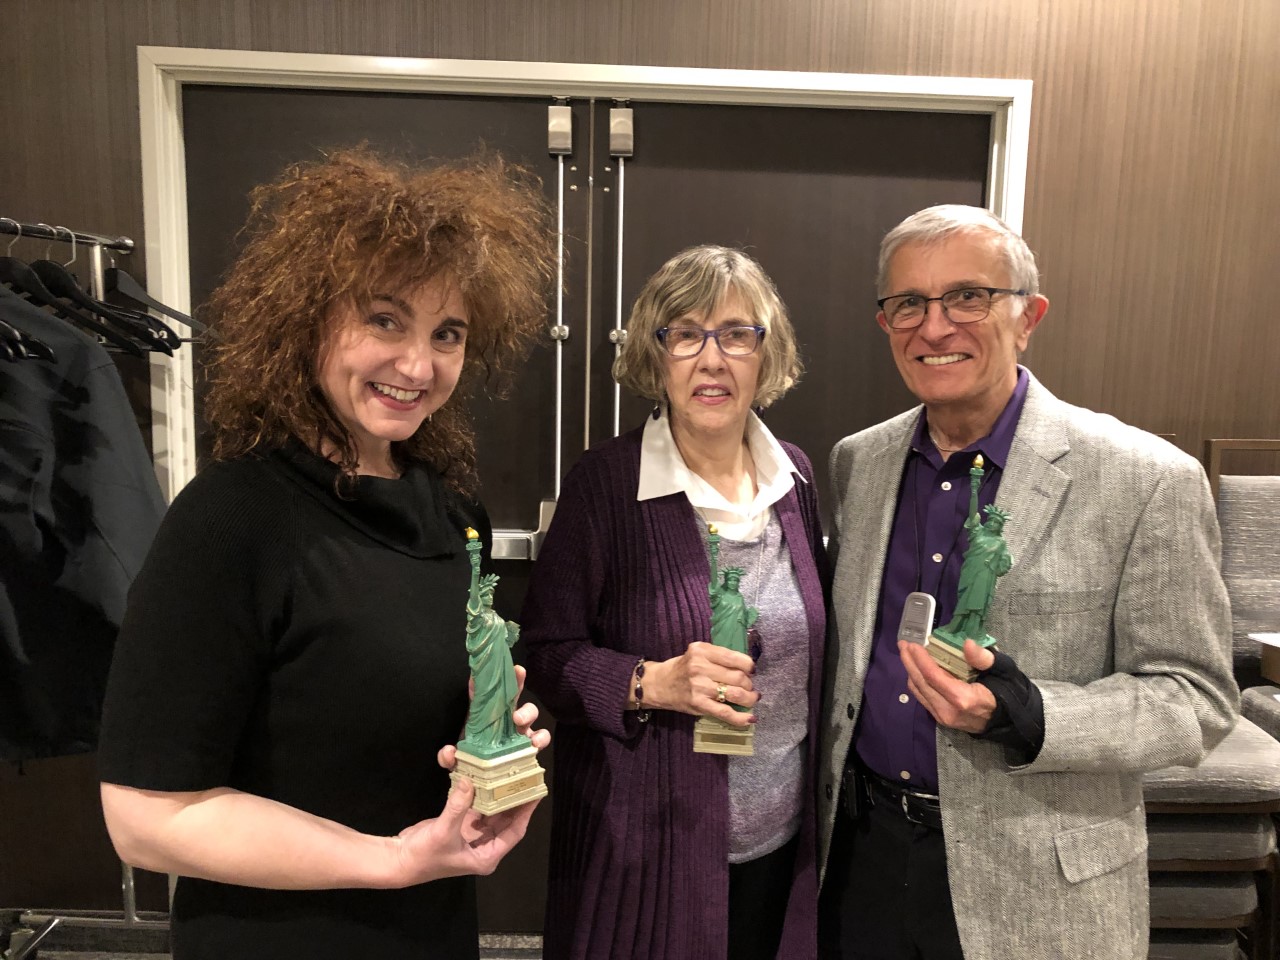 Lisa Gioi Randy & Dianne Szabla with their 2019 Defender of Liberty Awards.